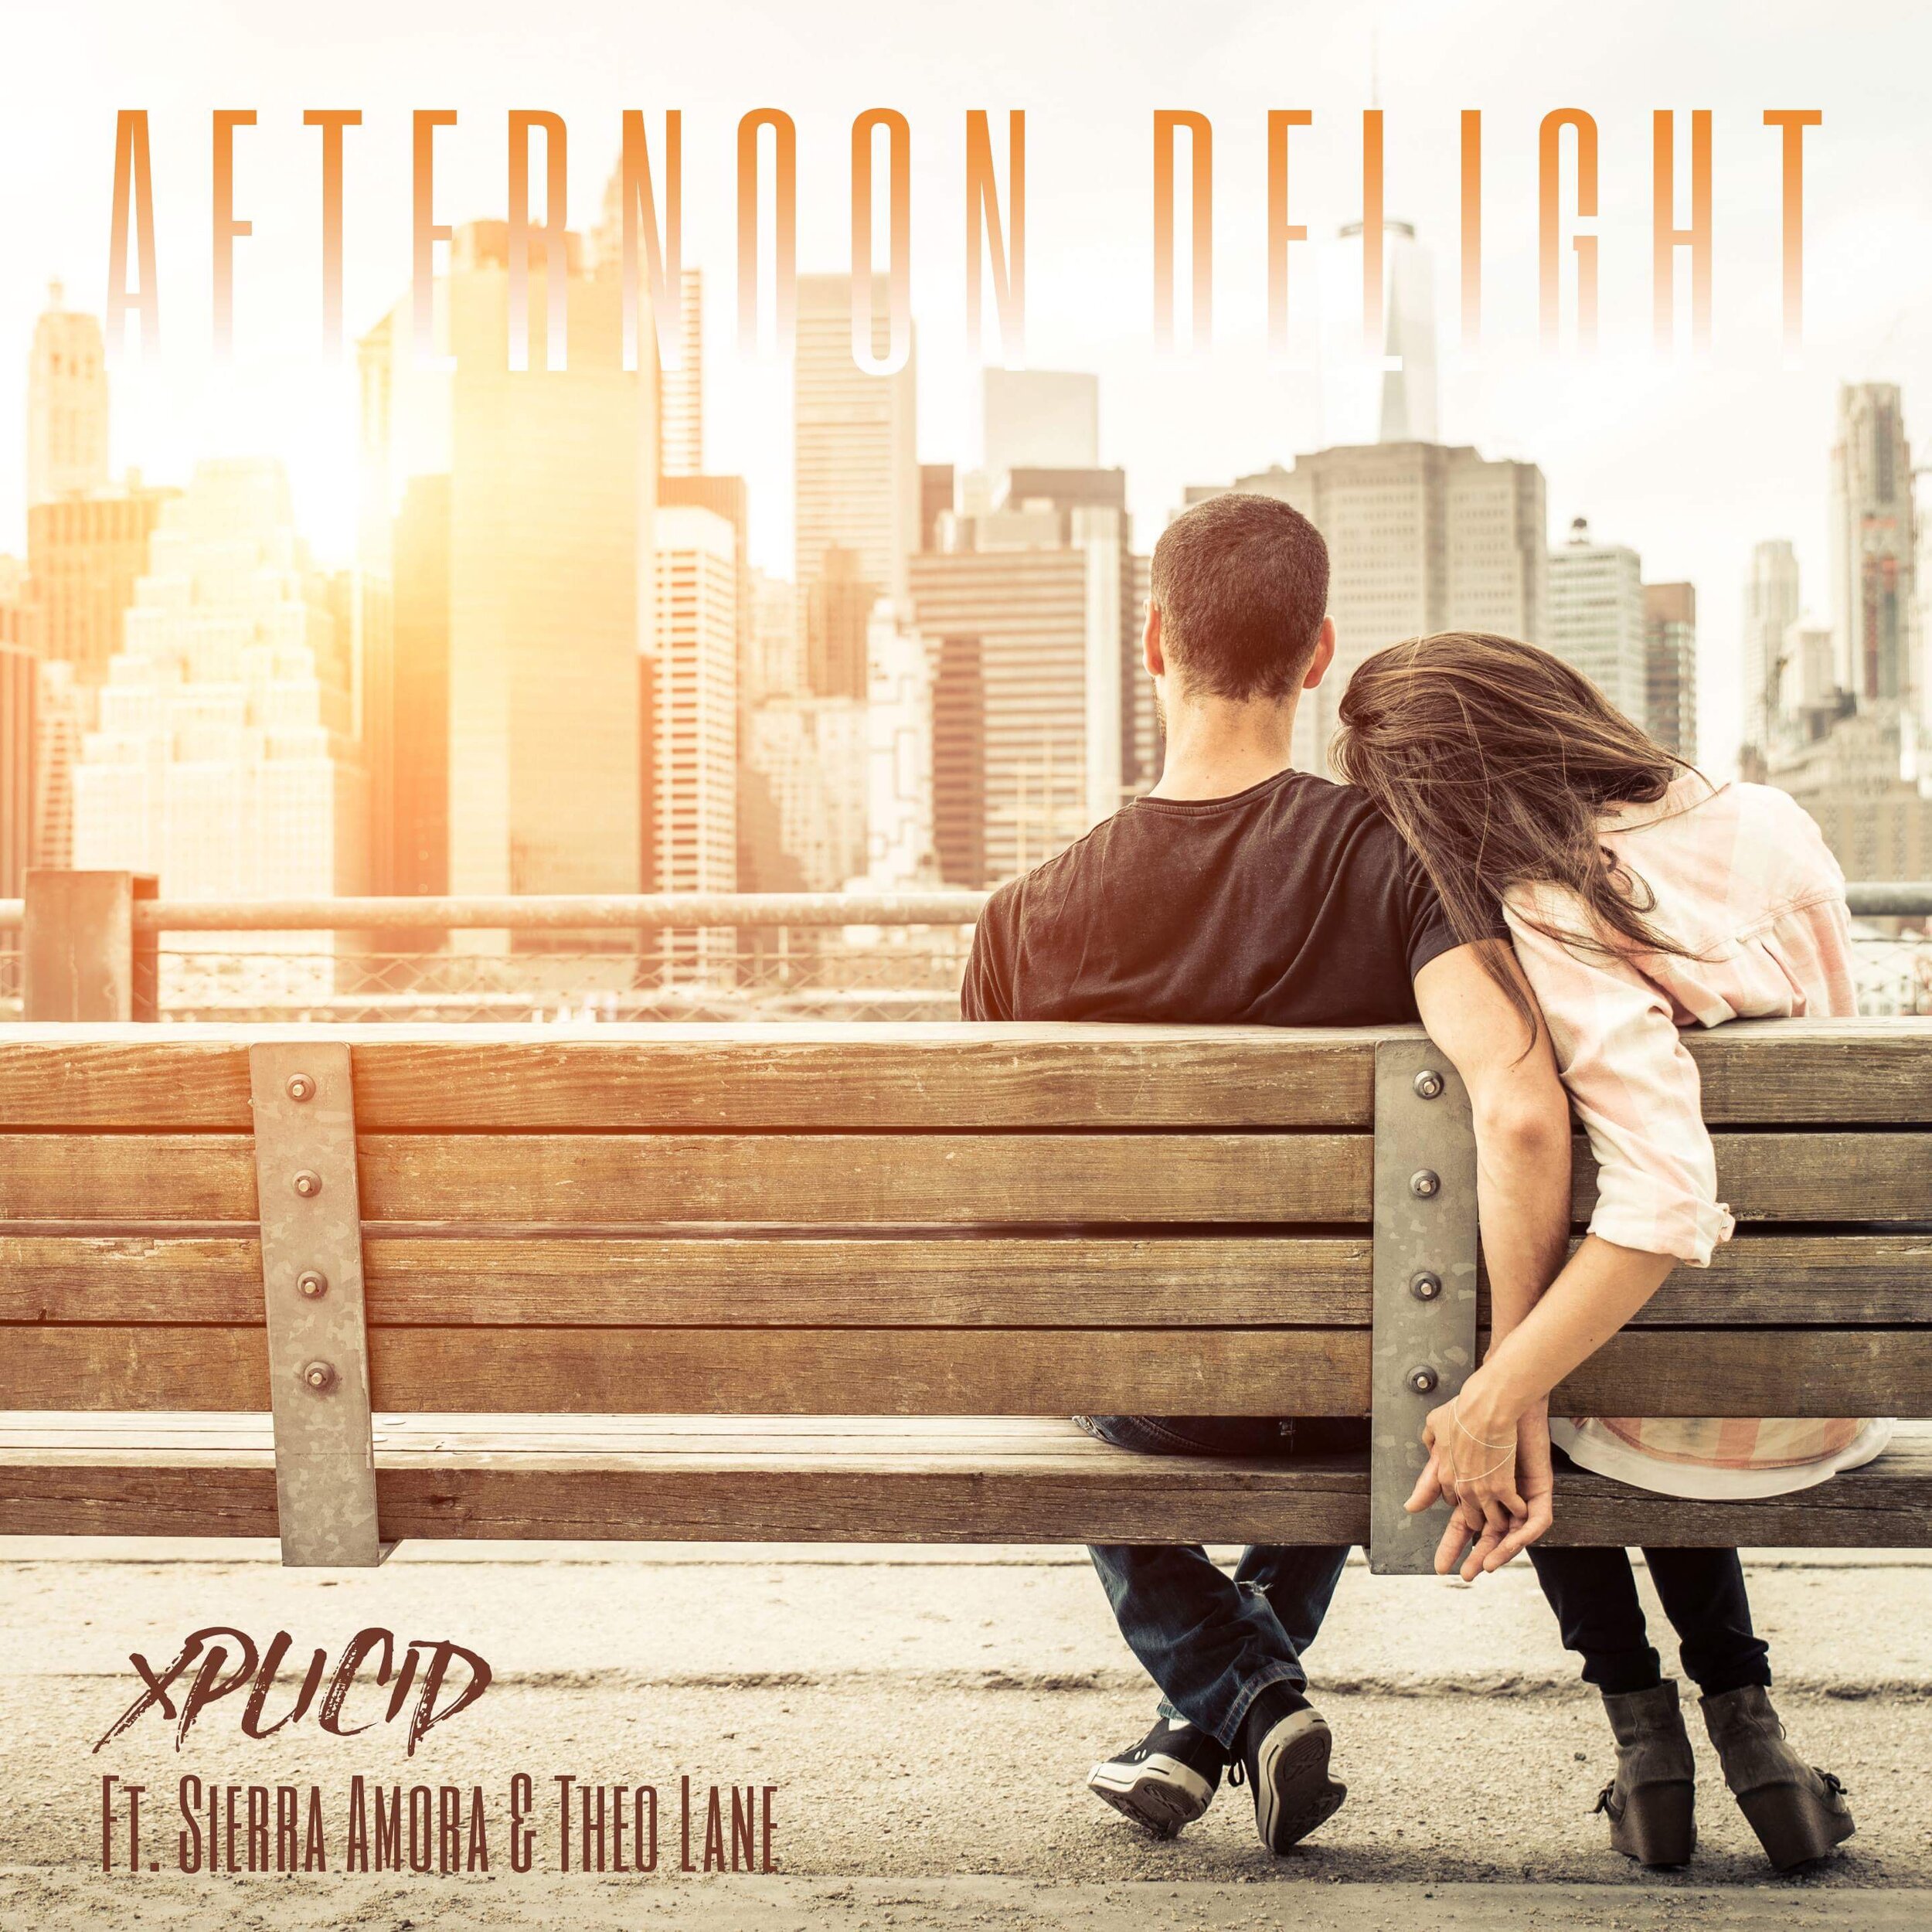 Afternoon Delight Graphic copy.JPG